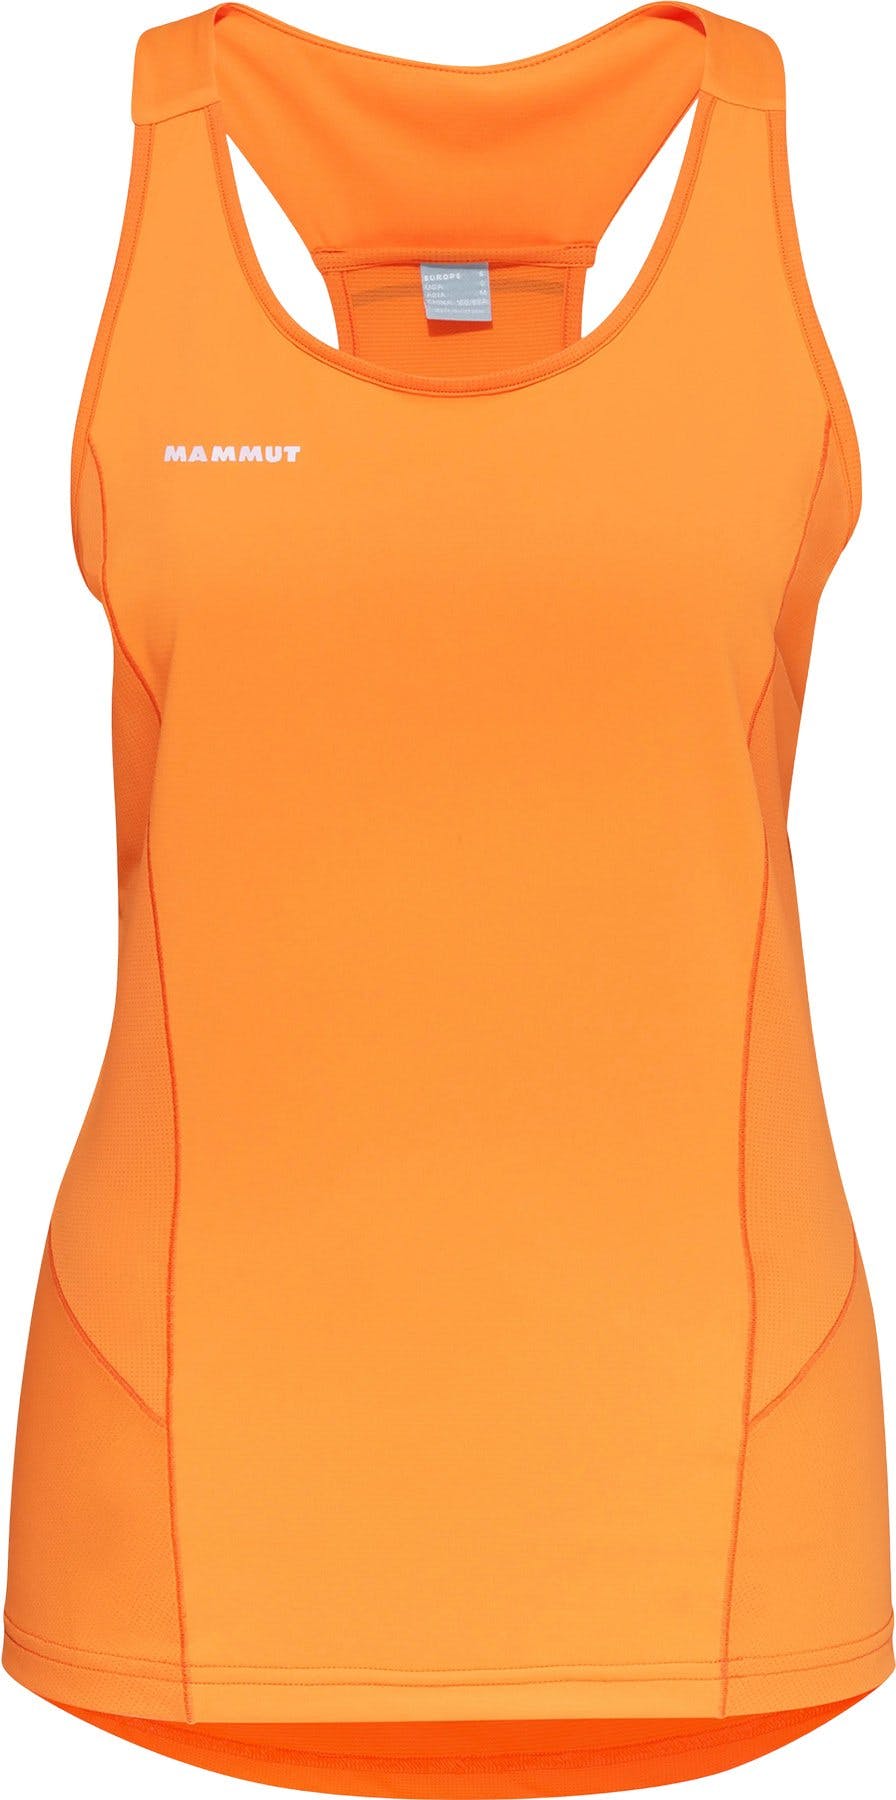 Product image for Aenergy First Layer Tank Top - Women's